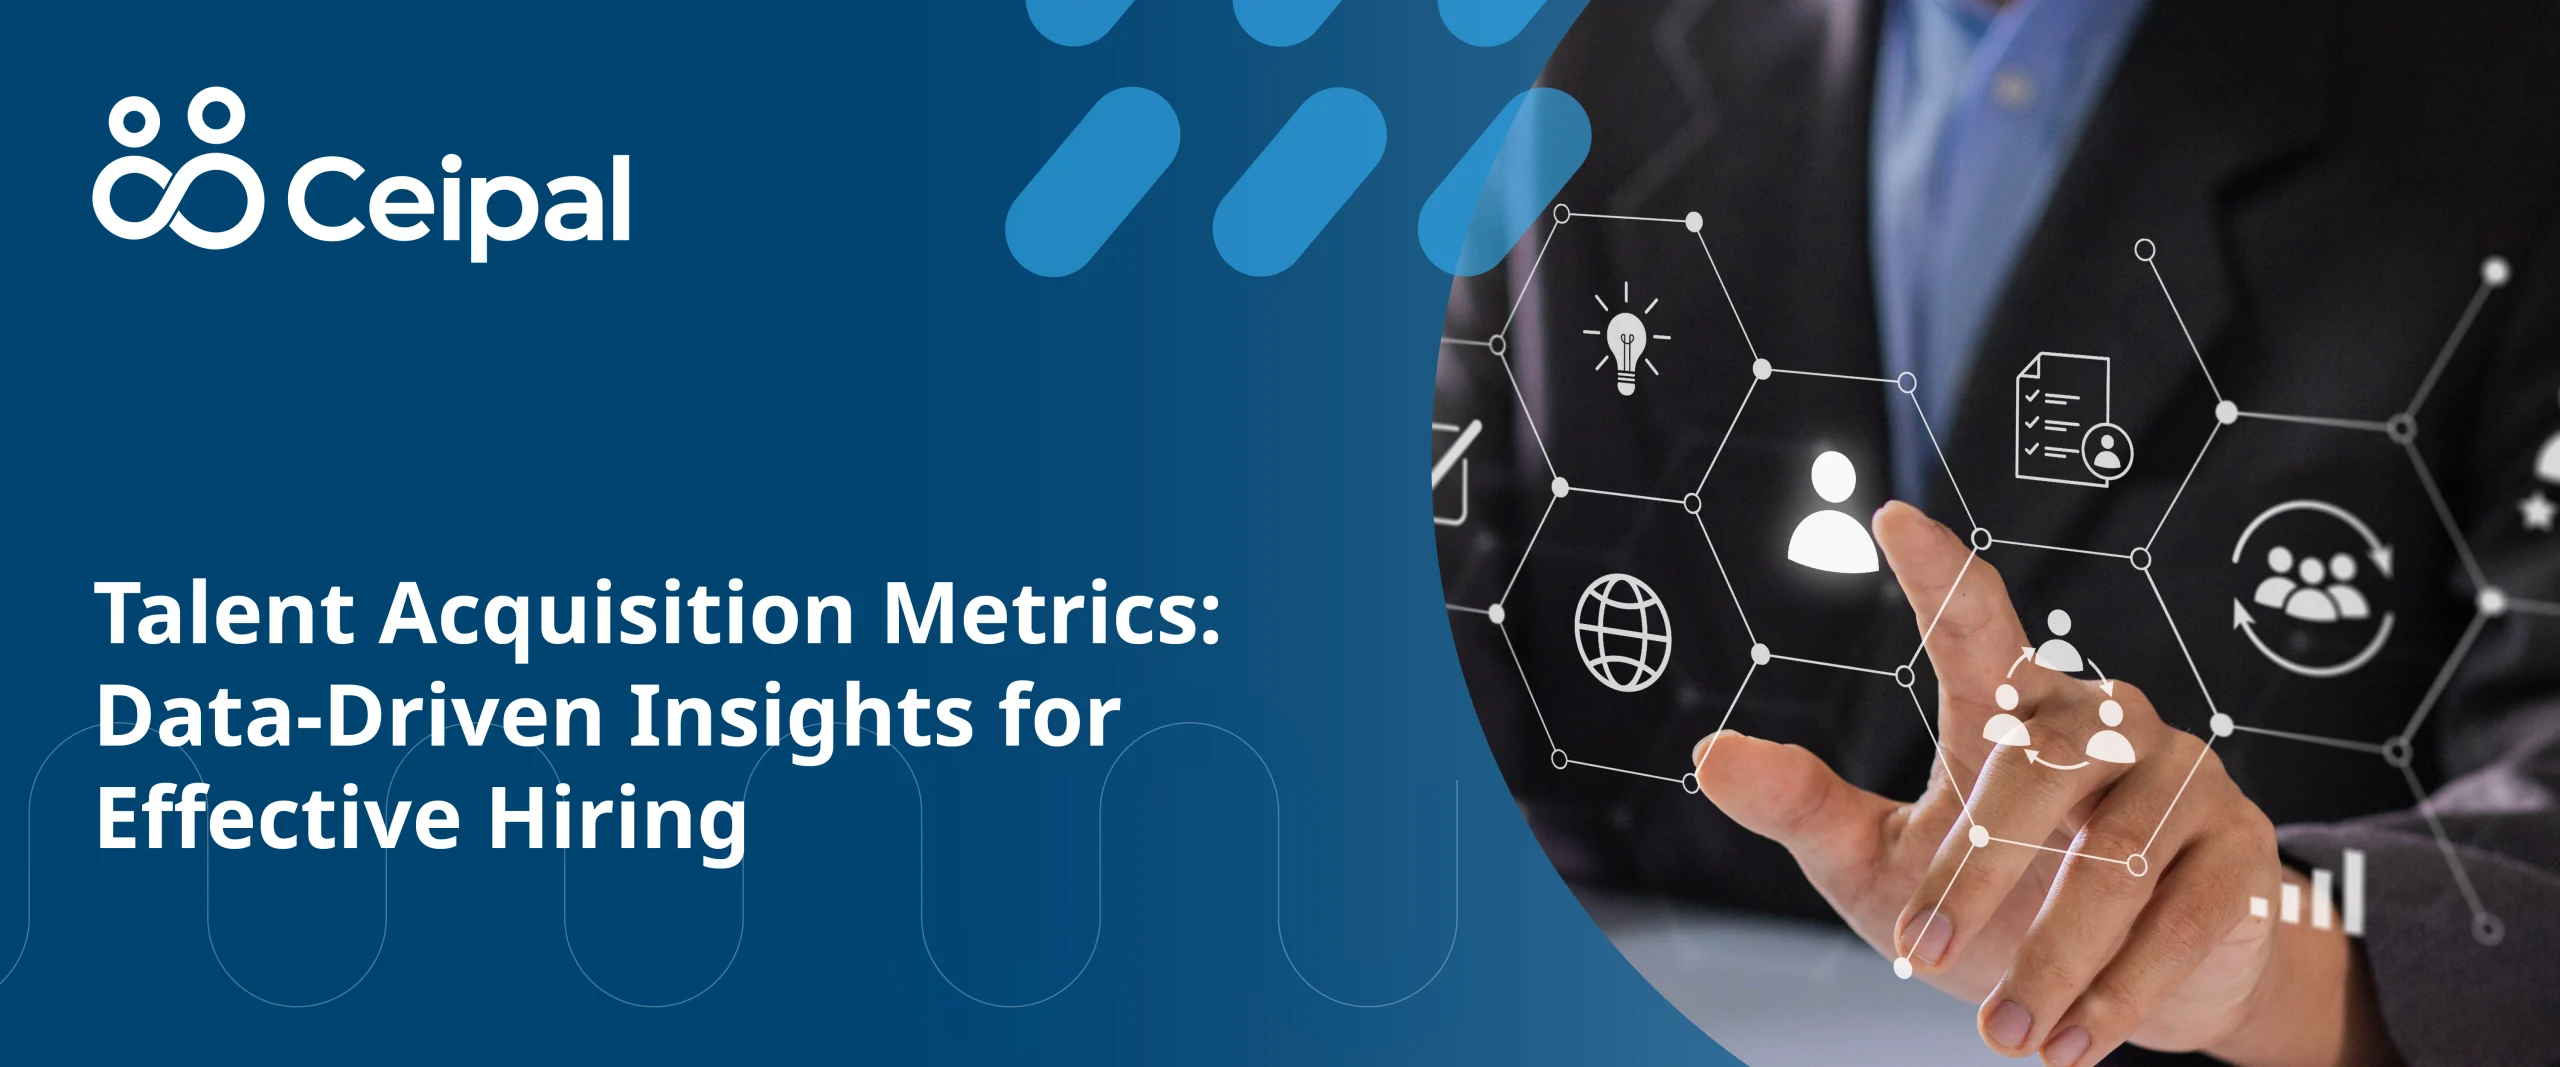 Talent Acquisition Metrics: Data-Driven Insights for Effective Hiring